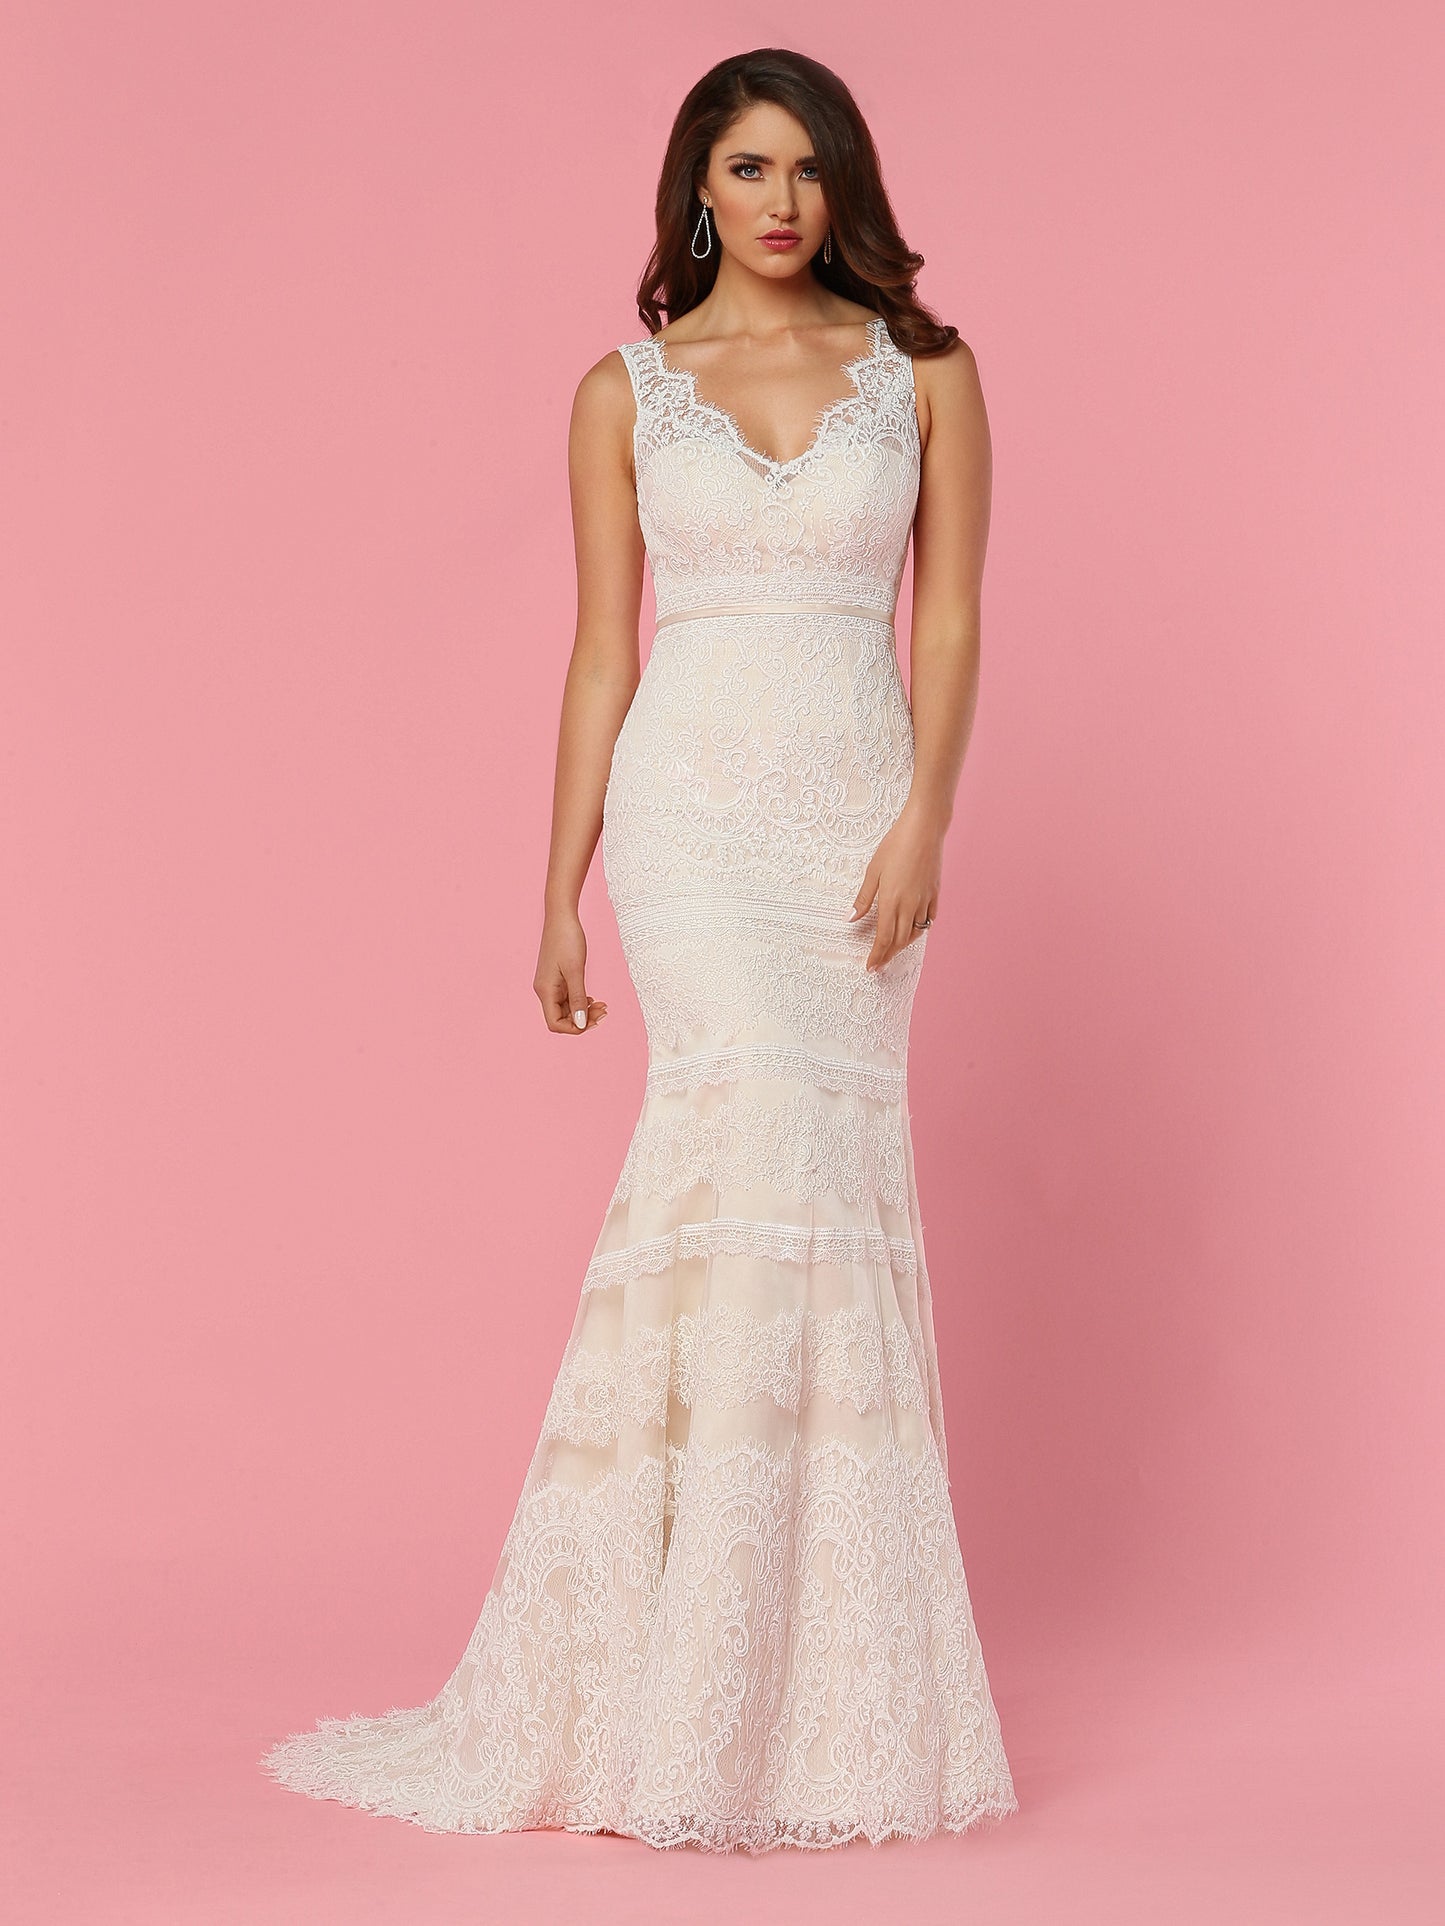 Davinci Bridal 50447 is a long fitted Mermaid Wedding dress. Featuring Allover lace with a sweetheart illusion V Neckline with sheer lace straps and a sheer Open V Back. attached Satin waist belt. Eyelash lace hem and train.  Available for 1-2 Week Delivery!!!  Available Sizes: 2,4,6,8,10,12,14,16,18,20  Available Colors: Ivory/Champagne, Ivory/Ivory